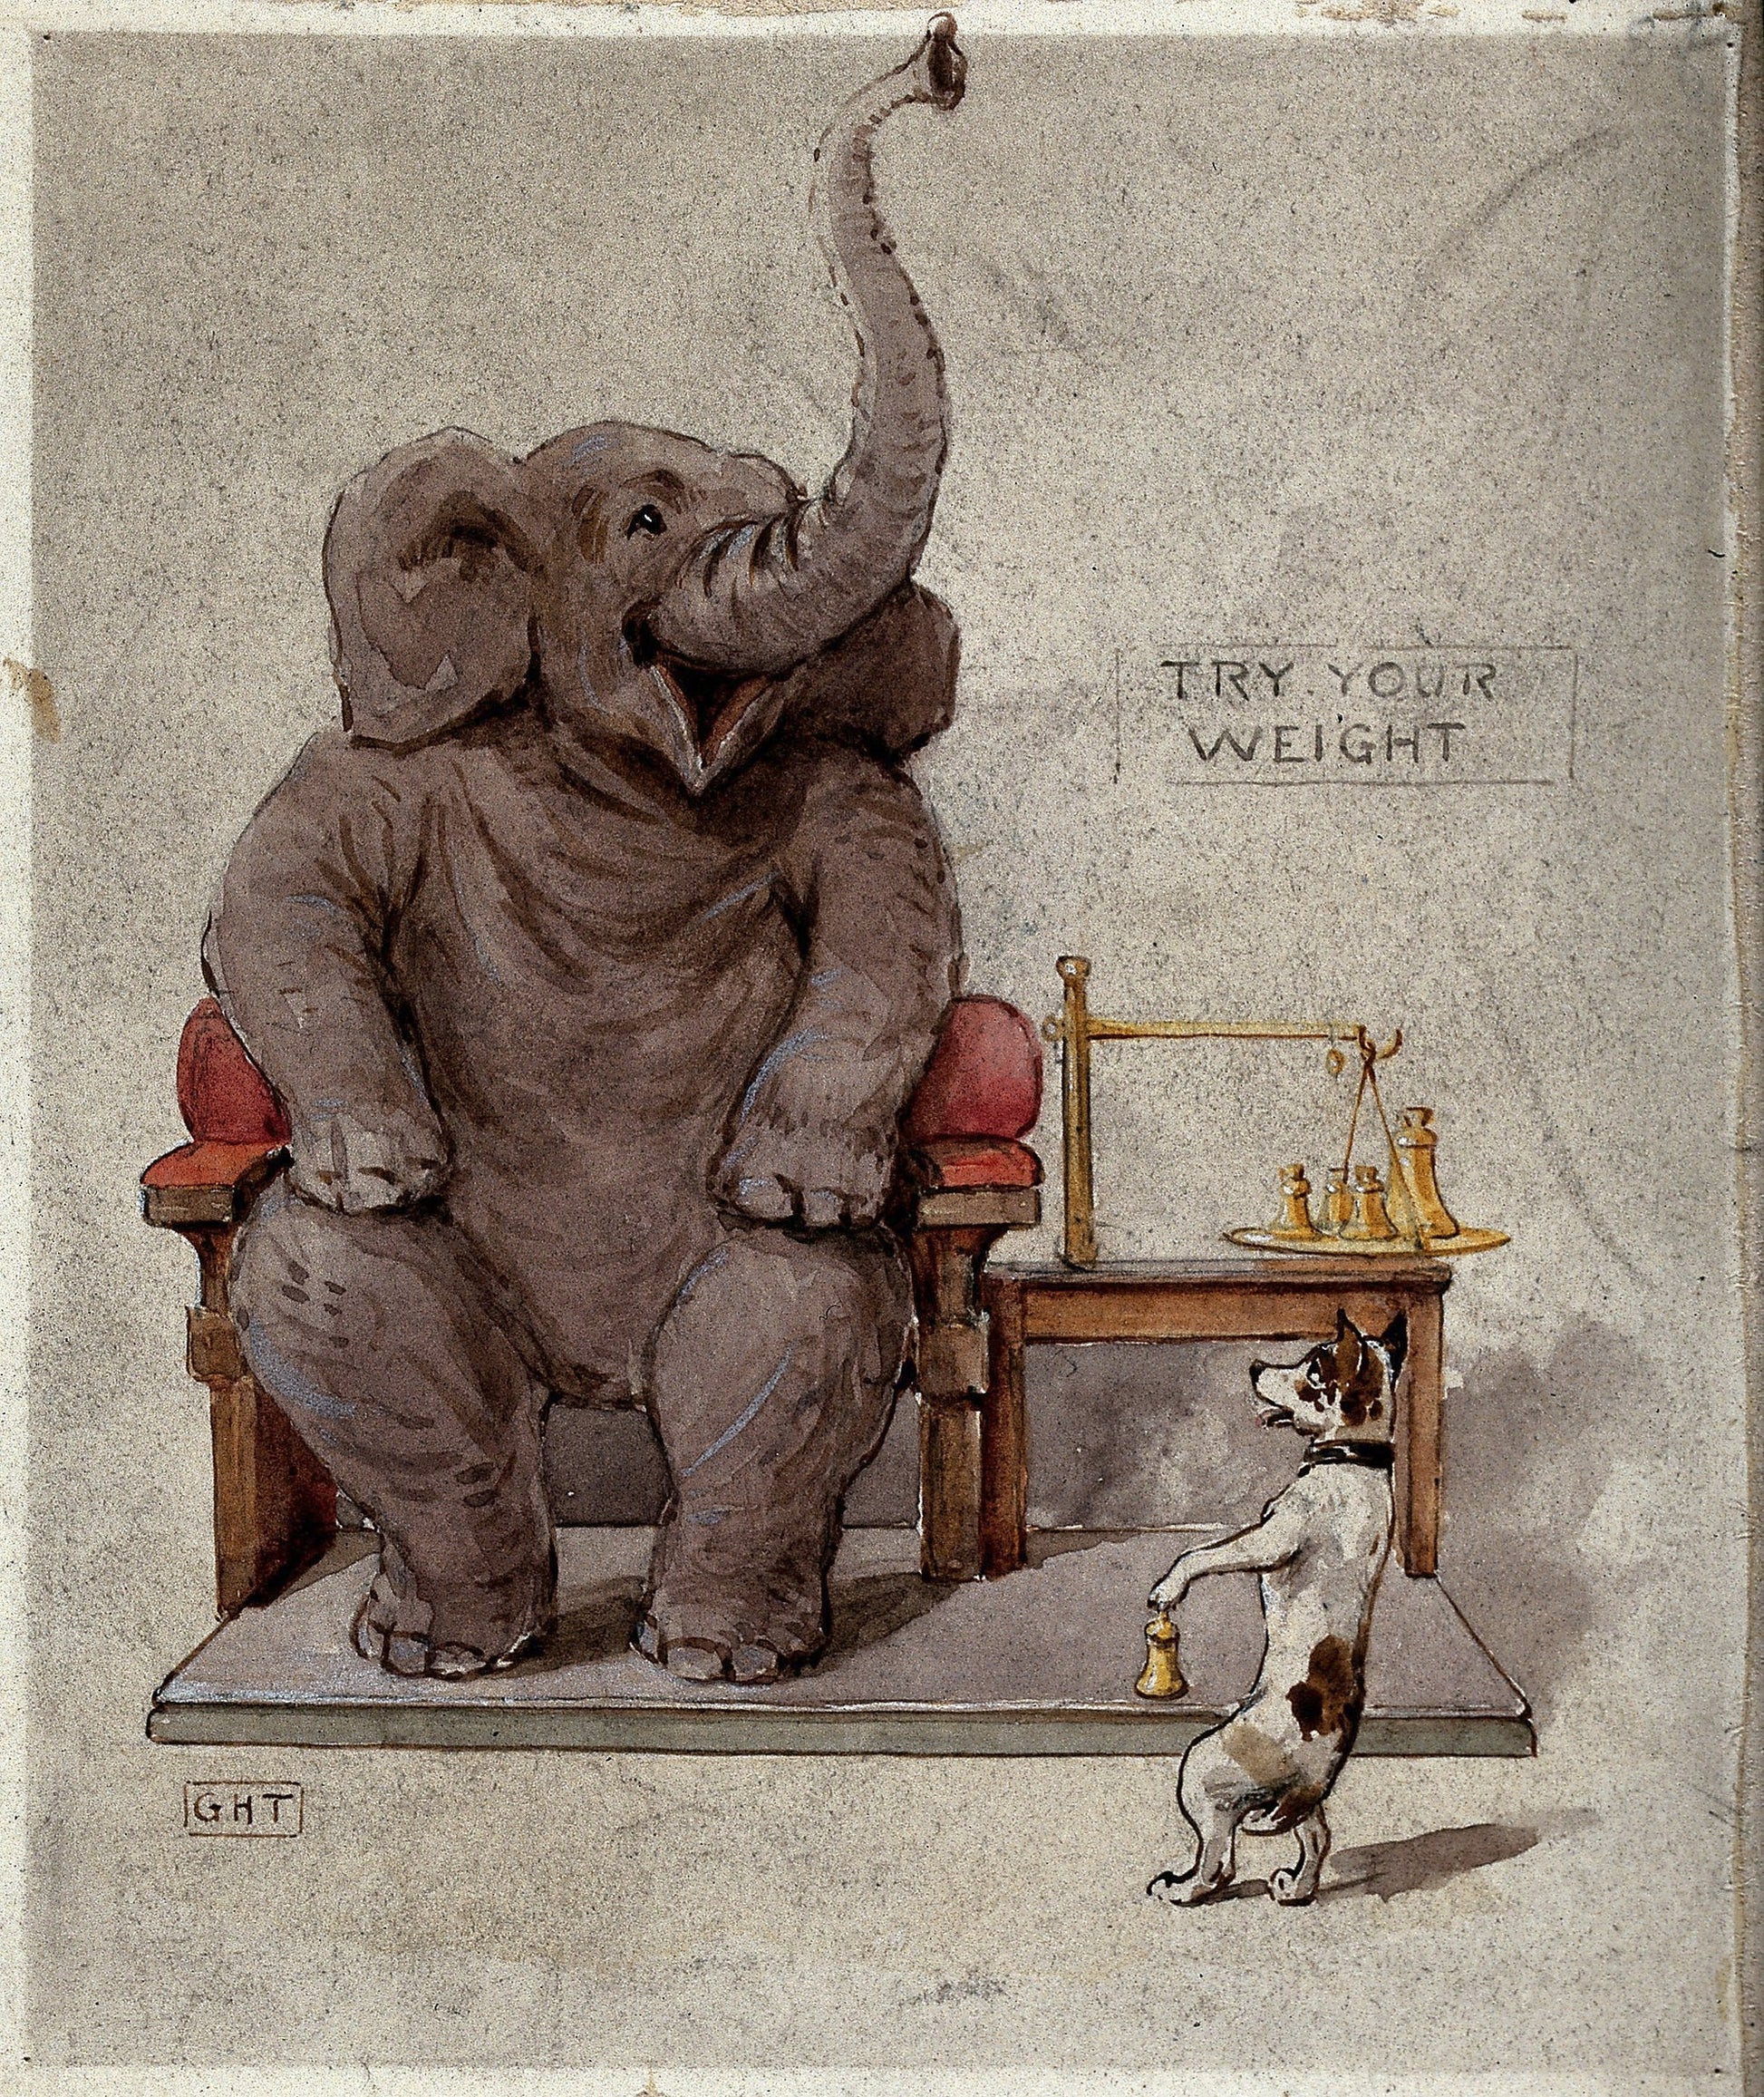 Elephant being weighed by a dog (1900s) | Vintage elephant prints | George Hope Tait Posters, Prints, & Visual Artwork The Trumpet Shop   